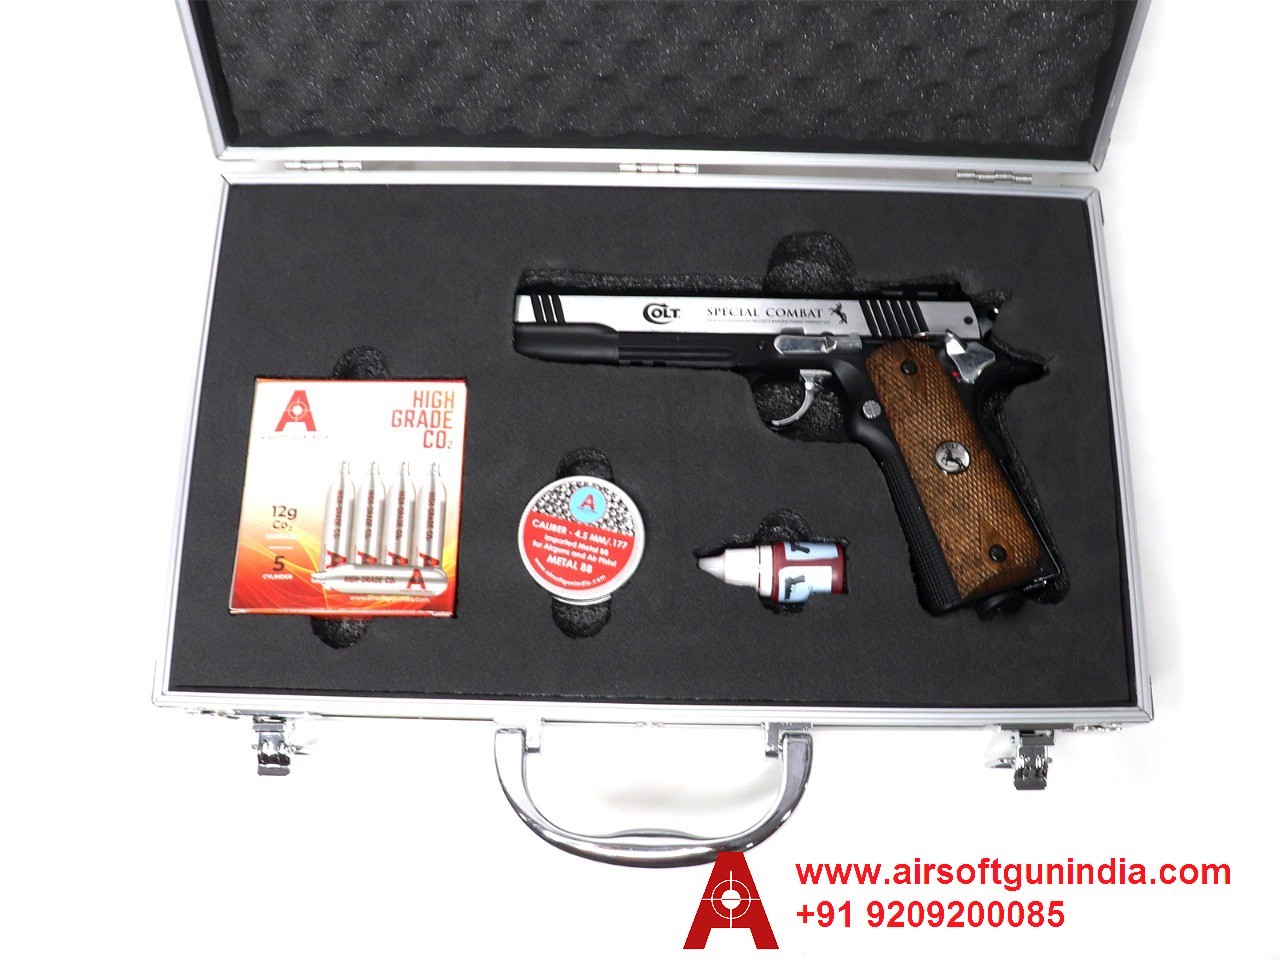 Customized Gun Case For Colt Special Combat 1911 Co2 BB Pistol By Airsoft Gun India